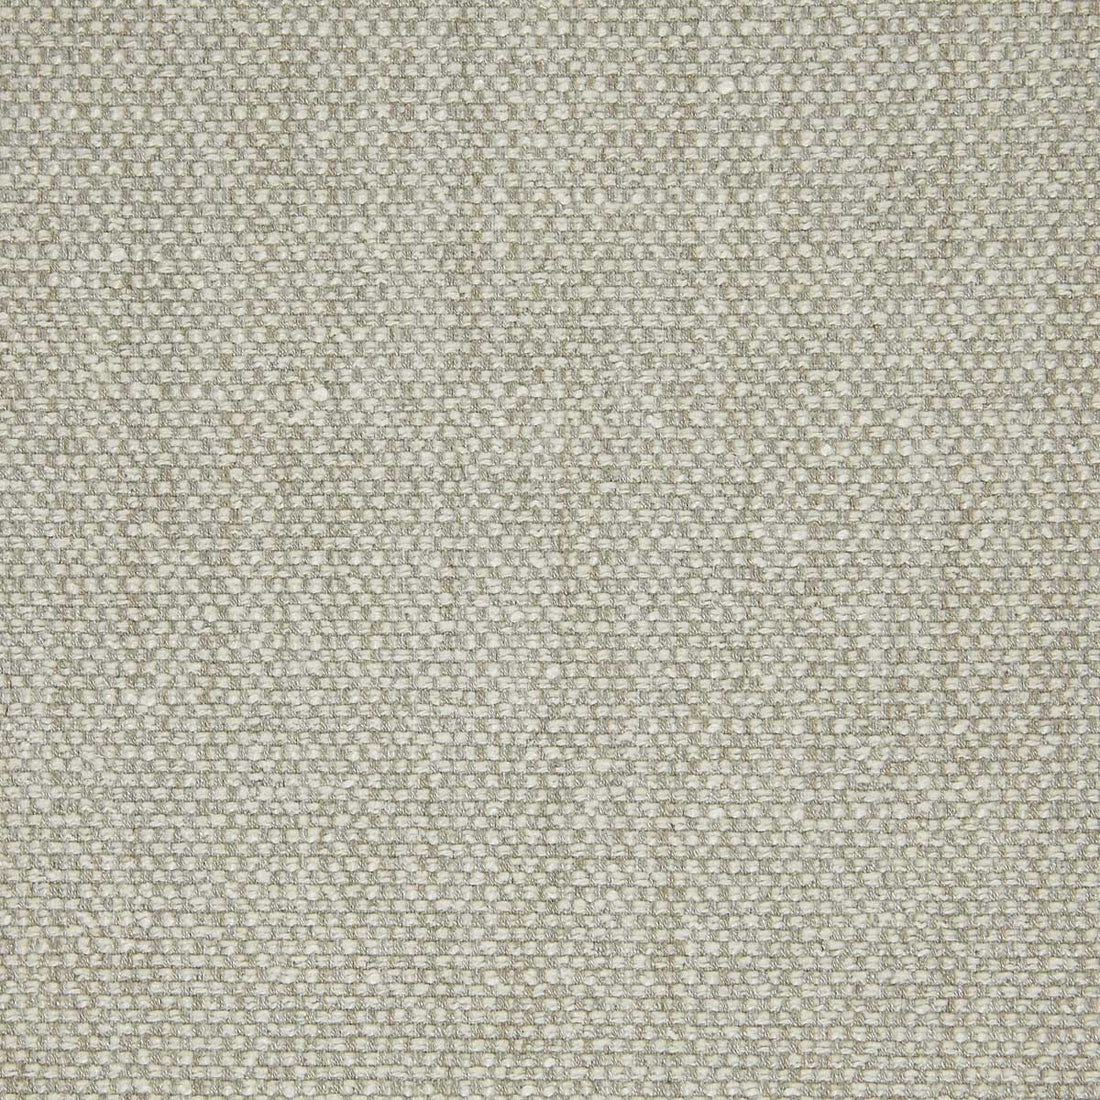 Godai fabric in 9 color - pattern LZ-30349.09.0 - by Kravet Design in the Lizzo collection